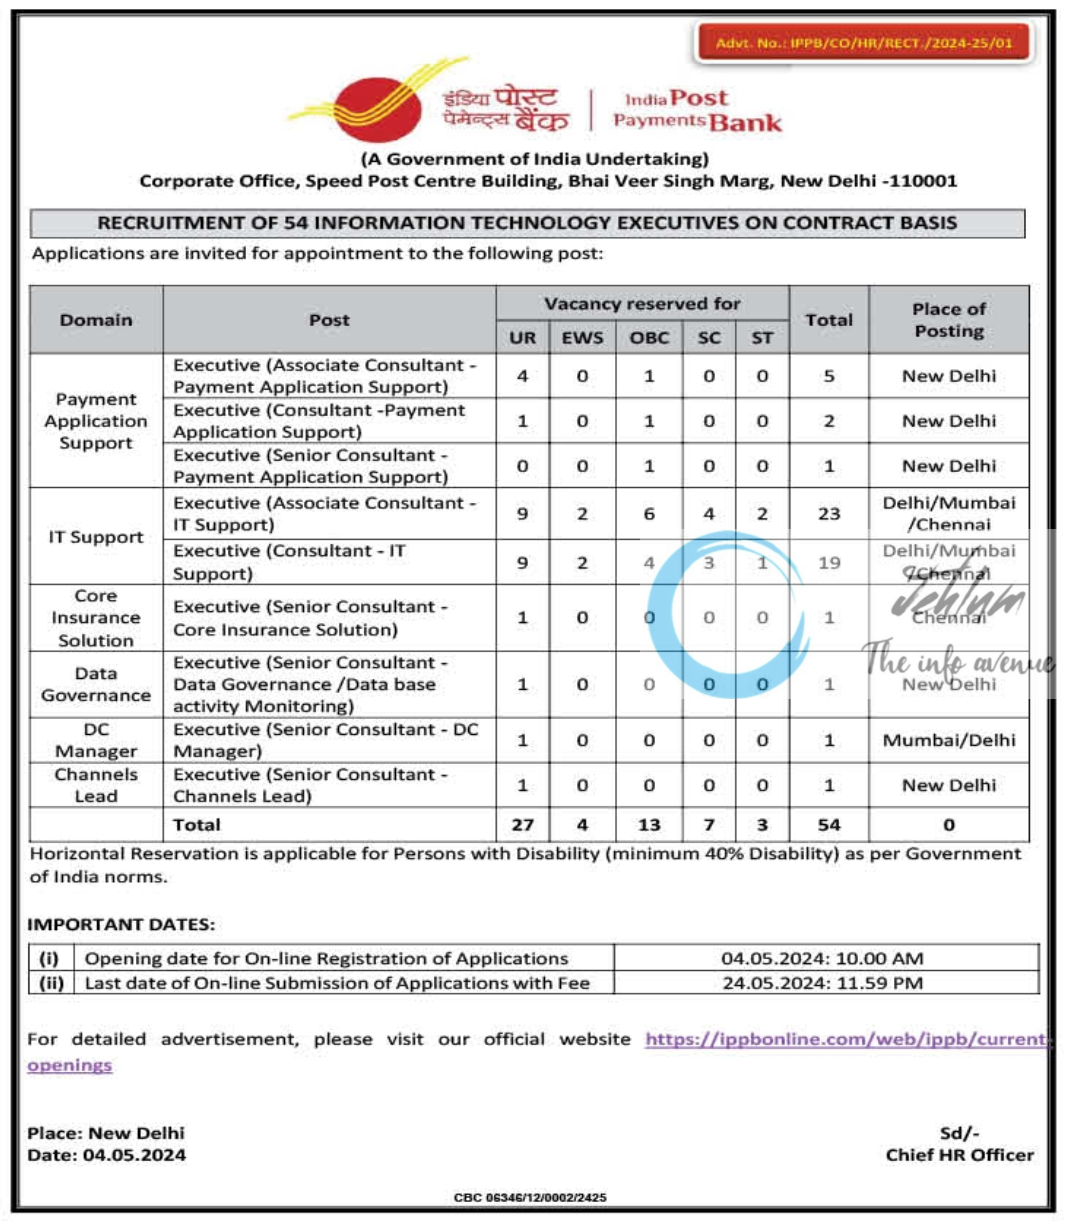 INDIA POST PAYMENTS BANK INFORMATION TECHNOLOGY IT EXECUTIVES RECRUITMENT NOTICE 2024